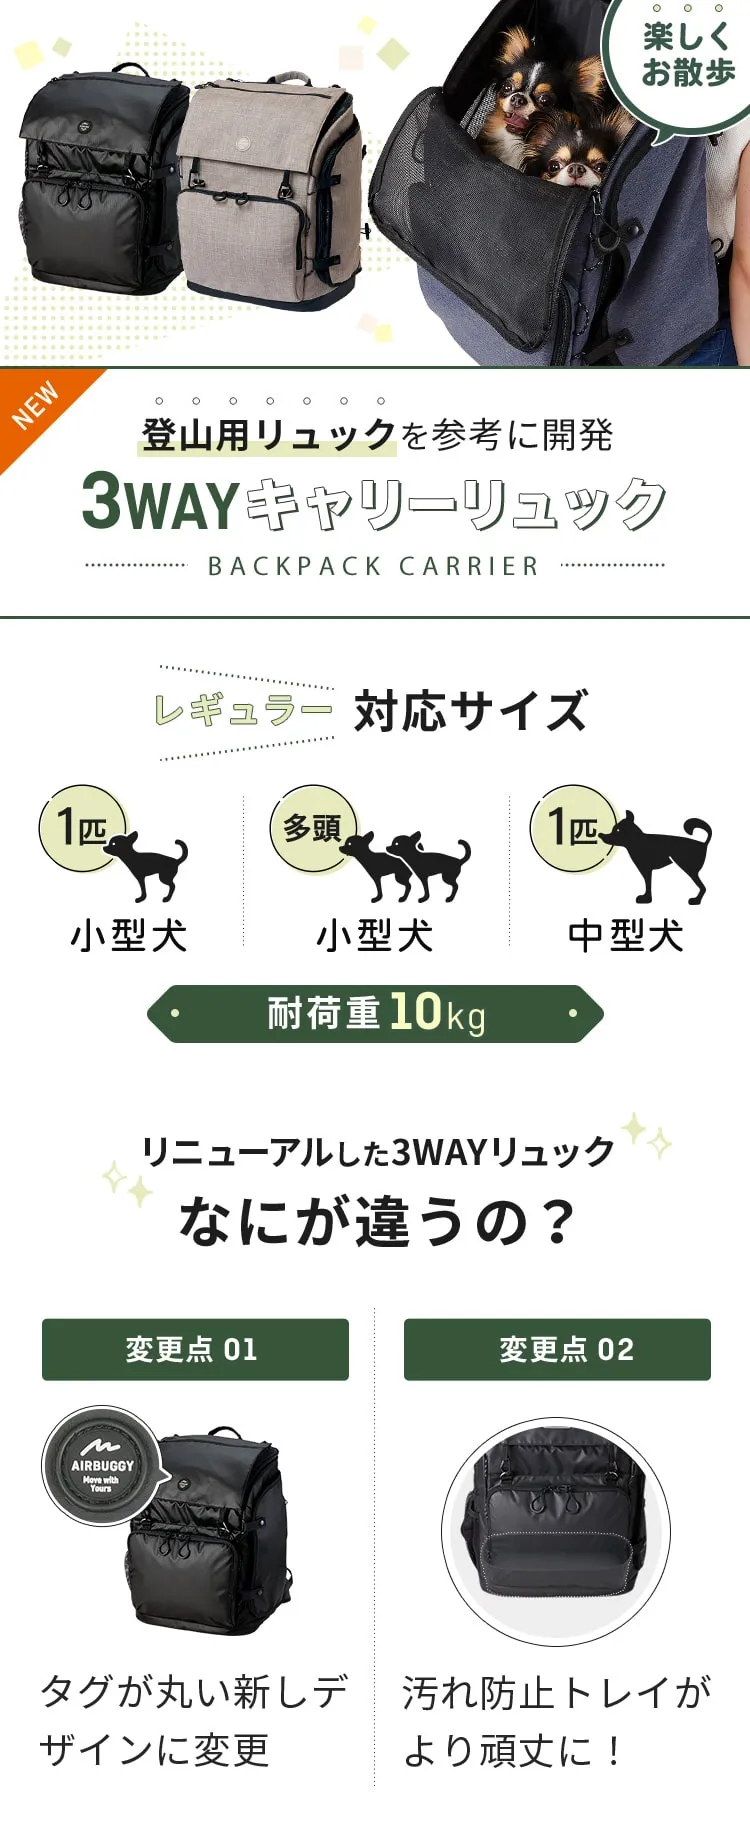 AIRBUGGY 3WAY BACKPACK CARRIER エアーバギー-